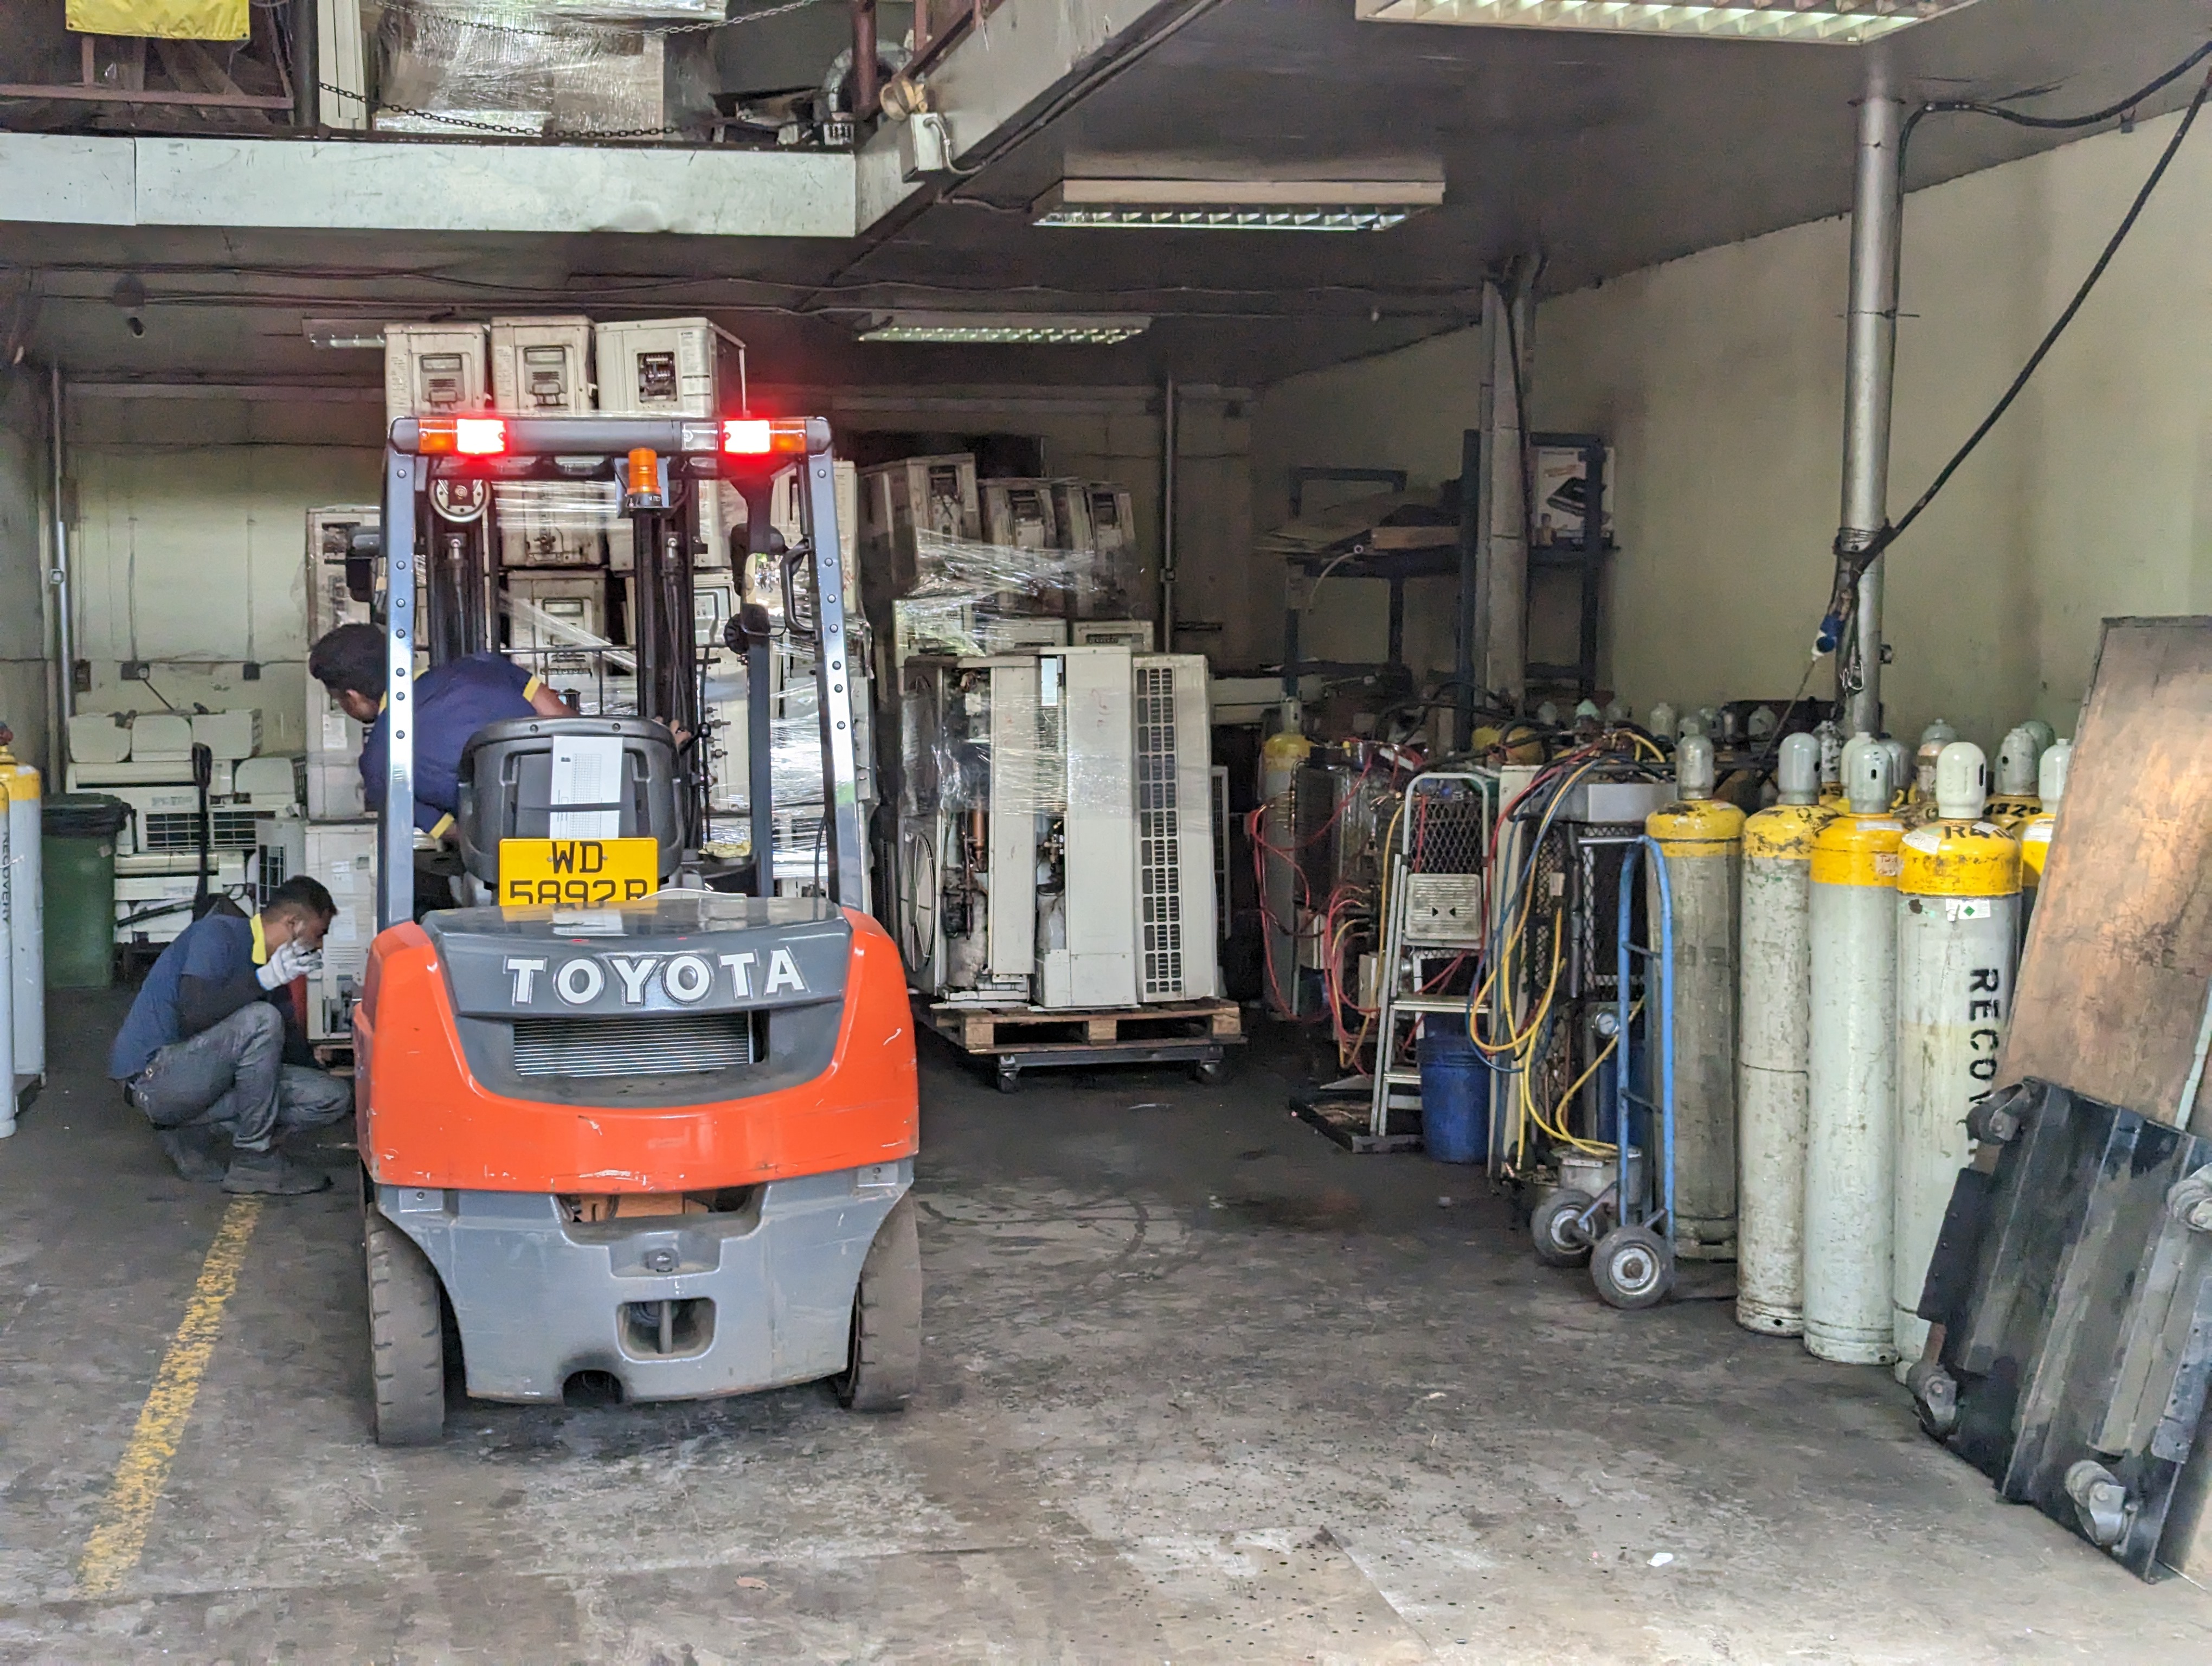 A forklift delivers a new bale of mini splits from which Cheng Hwa must recover refrigerant. The gray and yellow cylinders to the right contain recovered gases. One cylinder contains 125 pounds (58 kilograms) of refrigerant gas, equivalent to over 113 metric tons of carbon dioxide equivalent. Photo: Tilden Chao, 2023.